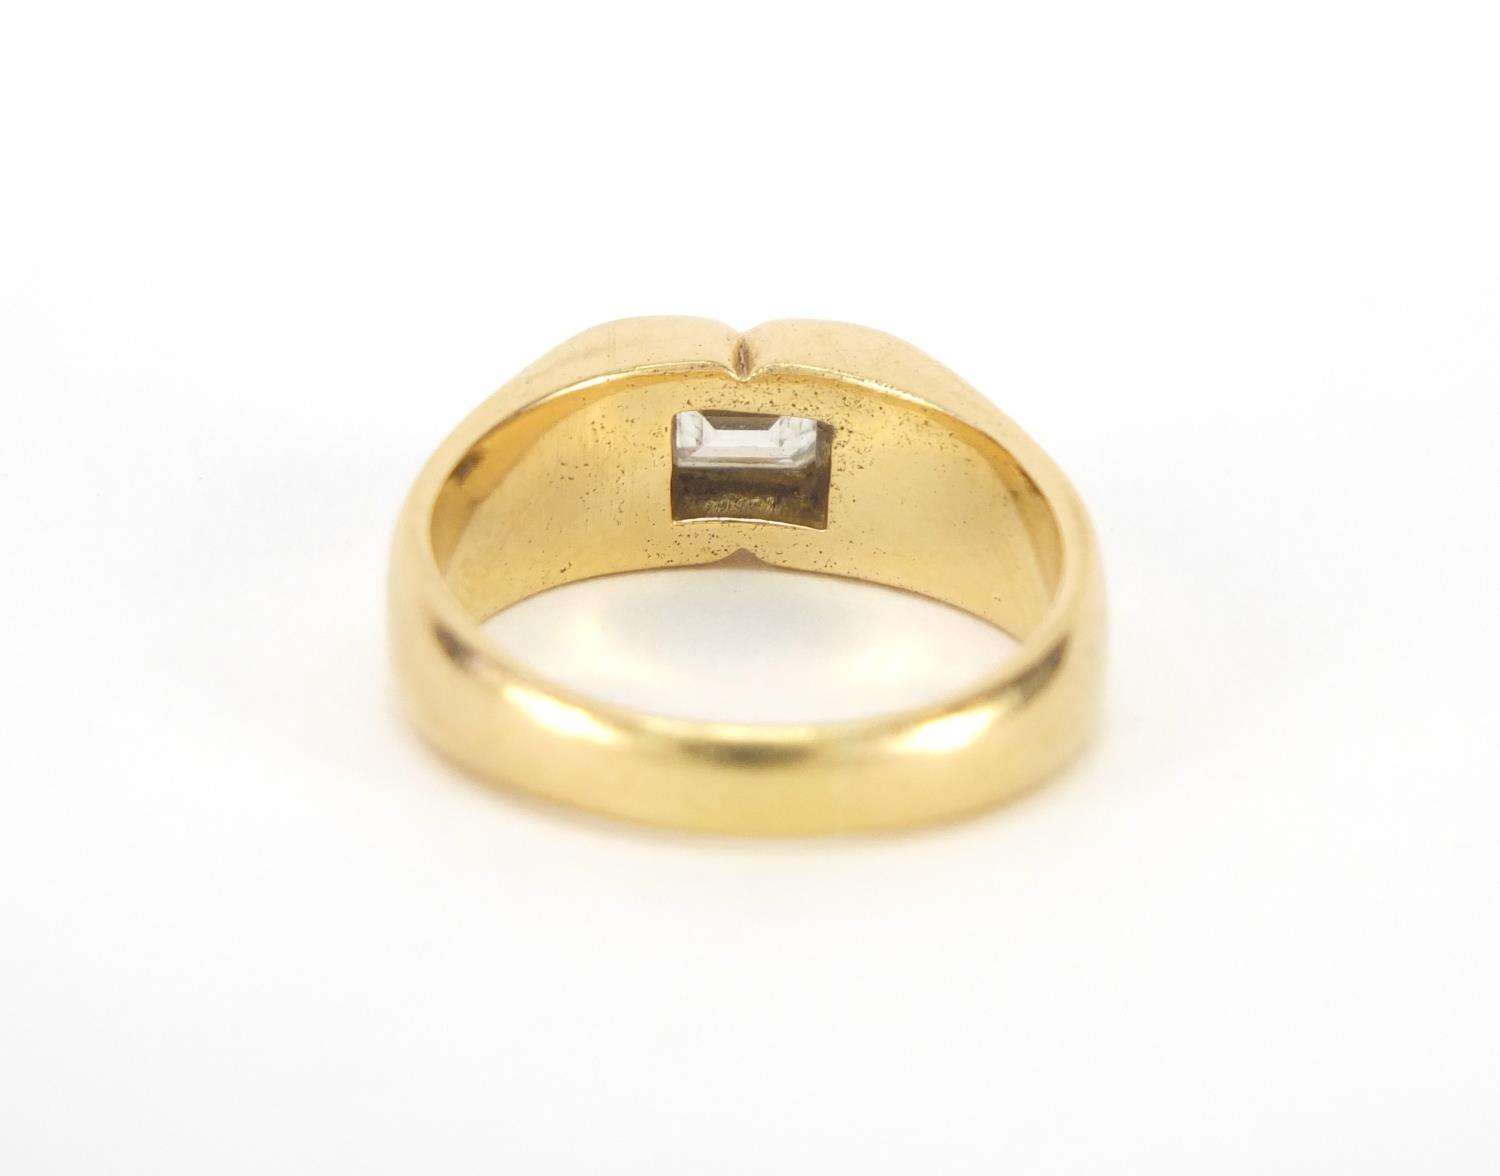 18ct gold baguette diamond solitaire ring, London 1980, size T, approximate weight 11.8g : For extra - Image 4 of 5